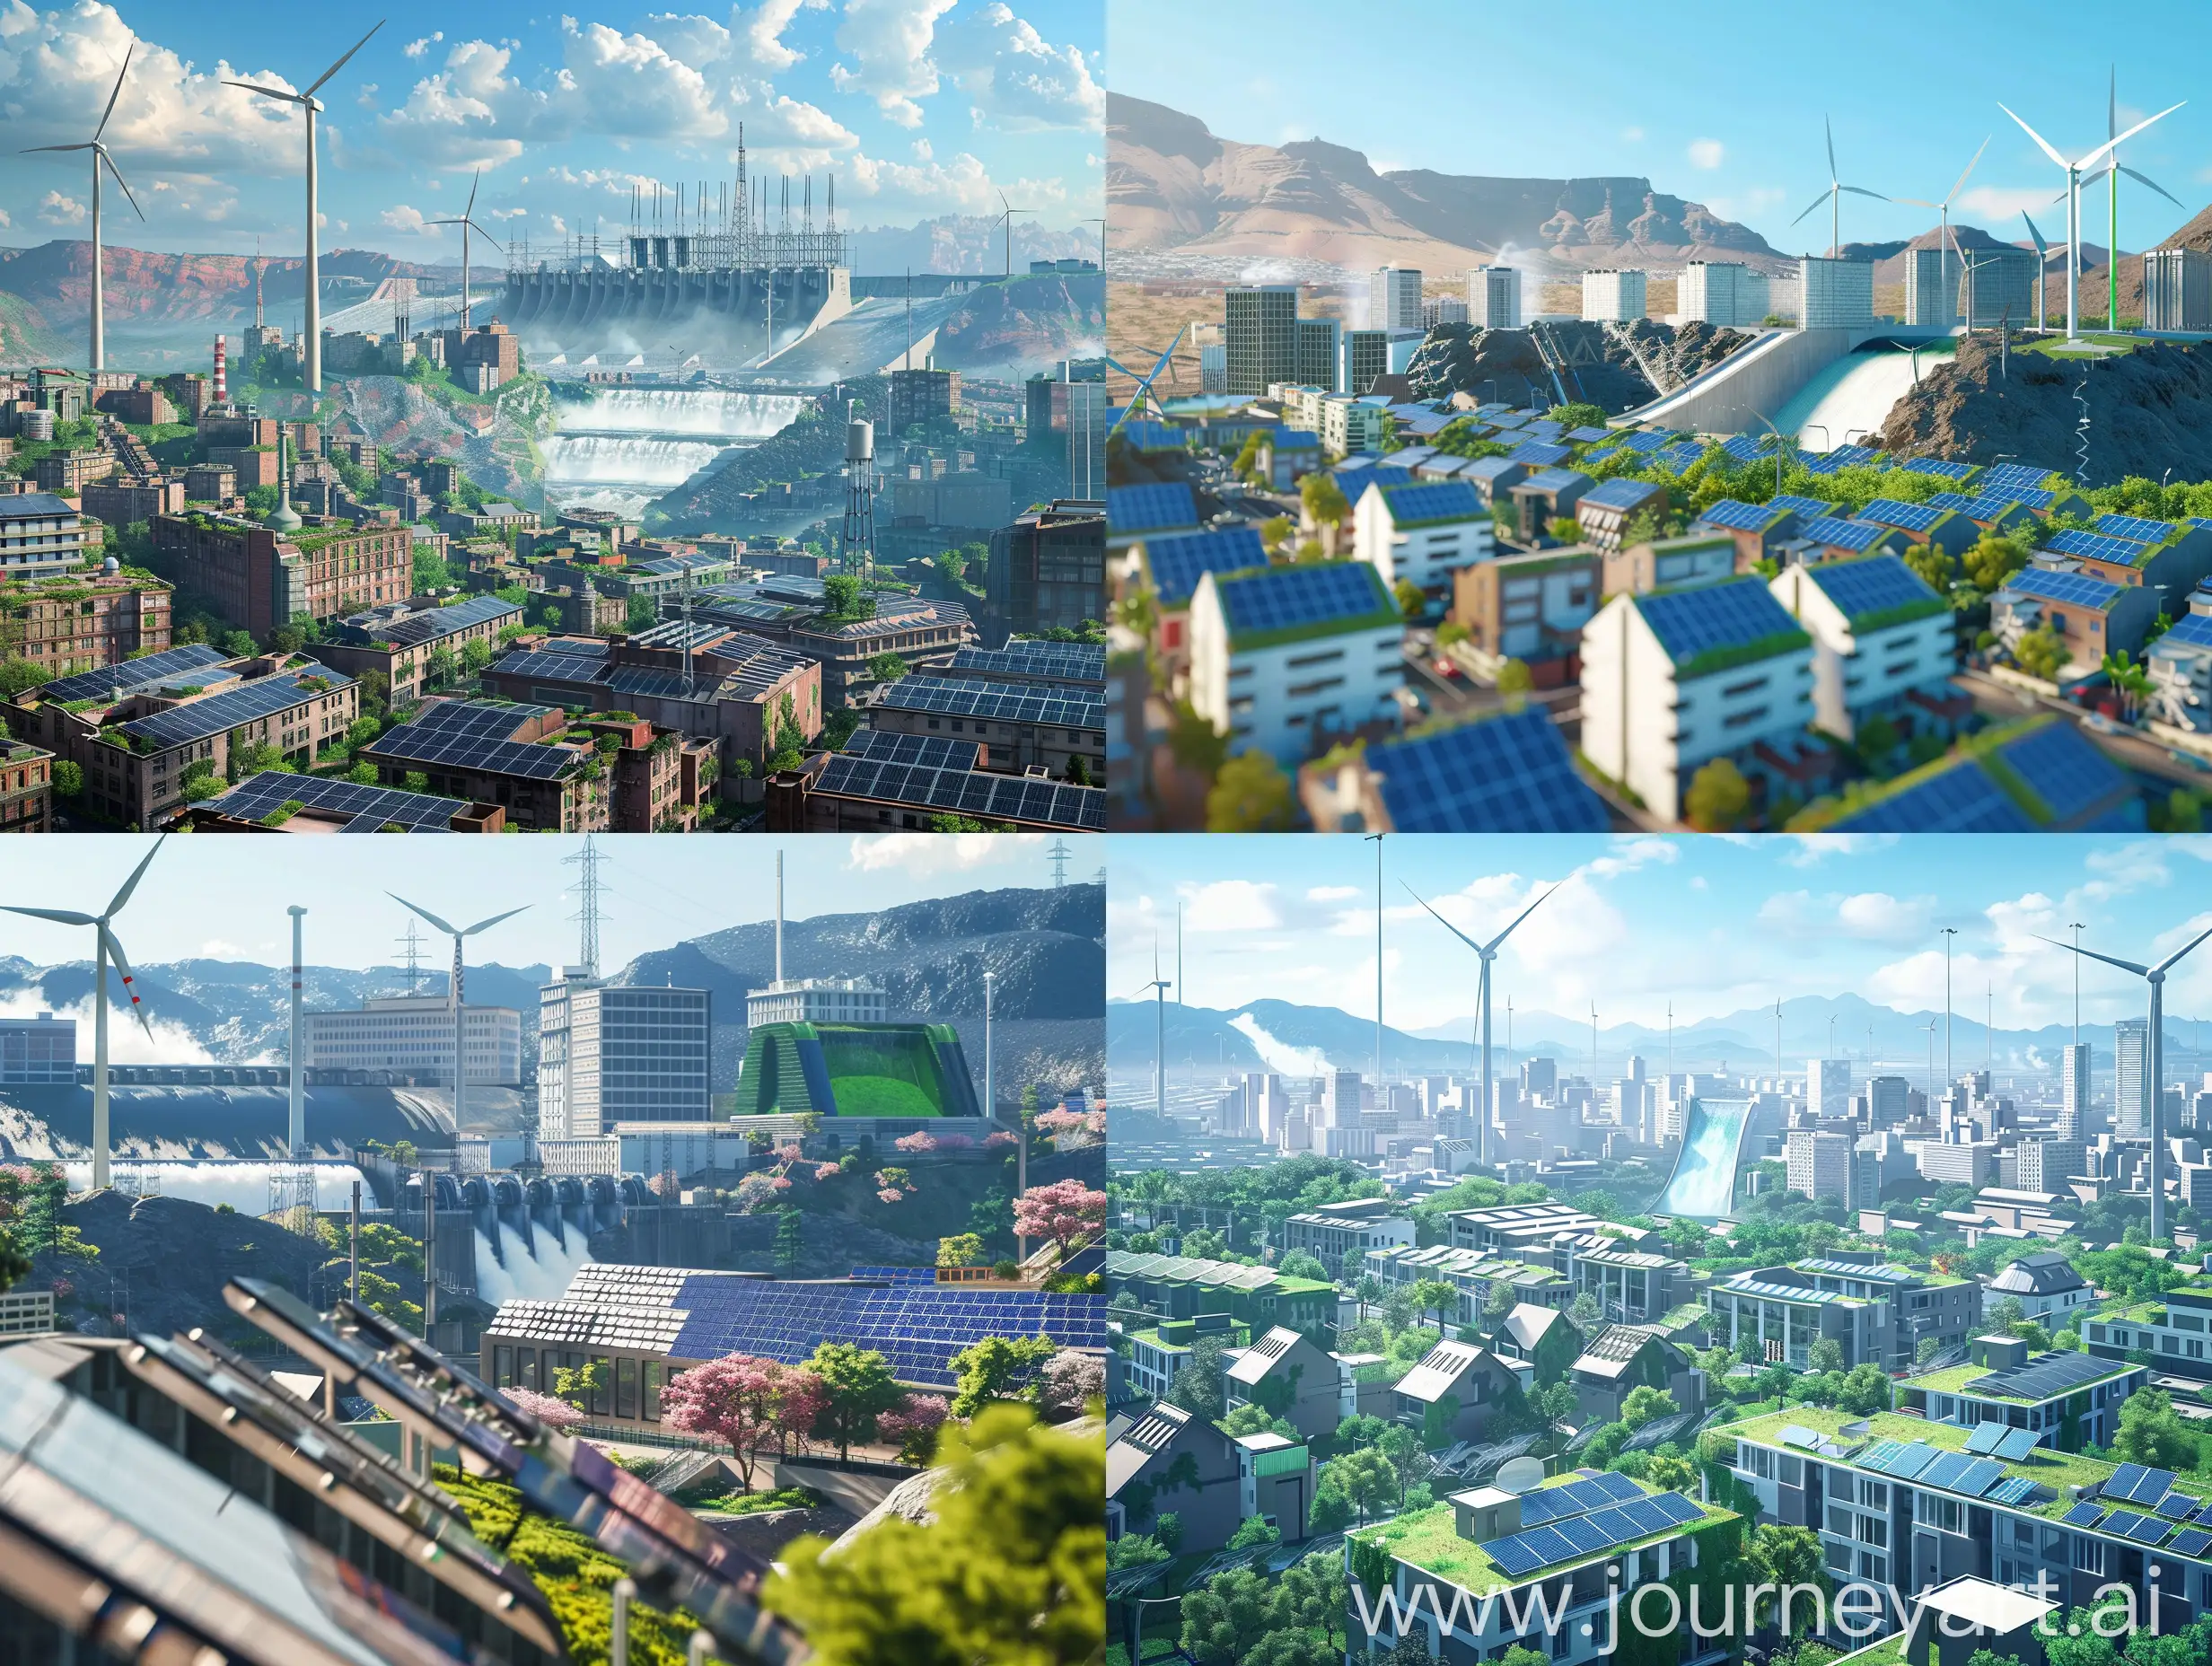  A hyperrealistic image of a bustling cityscape powered by a mix of energy sources. Wind turbines stand tall in the distance, solar panels line rooftops, and a hydroelectric dam provides power in the background, with the idea of a green future